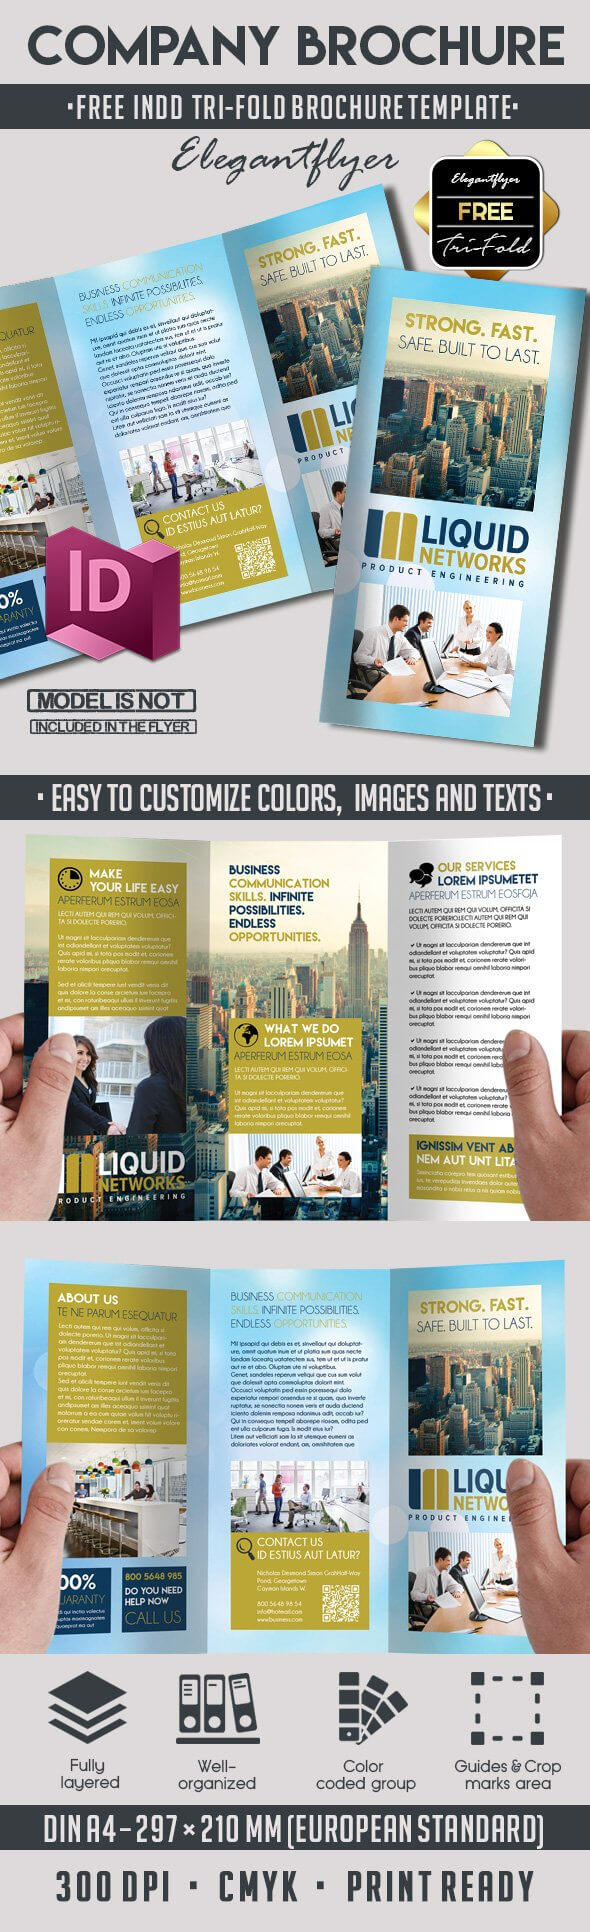 5 Powerful Free Adobe Indesign Brochures Templates! | Pertaining To Adobe Indesign Tri Fold Brochure Template